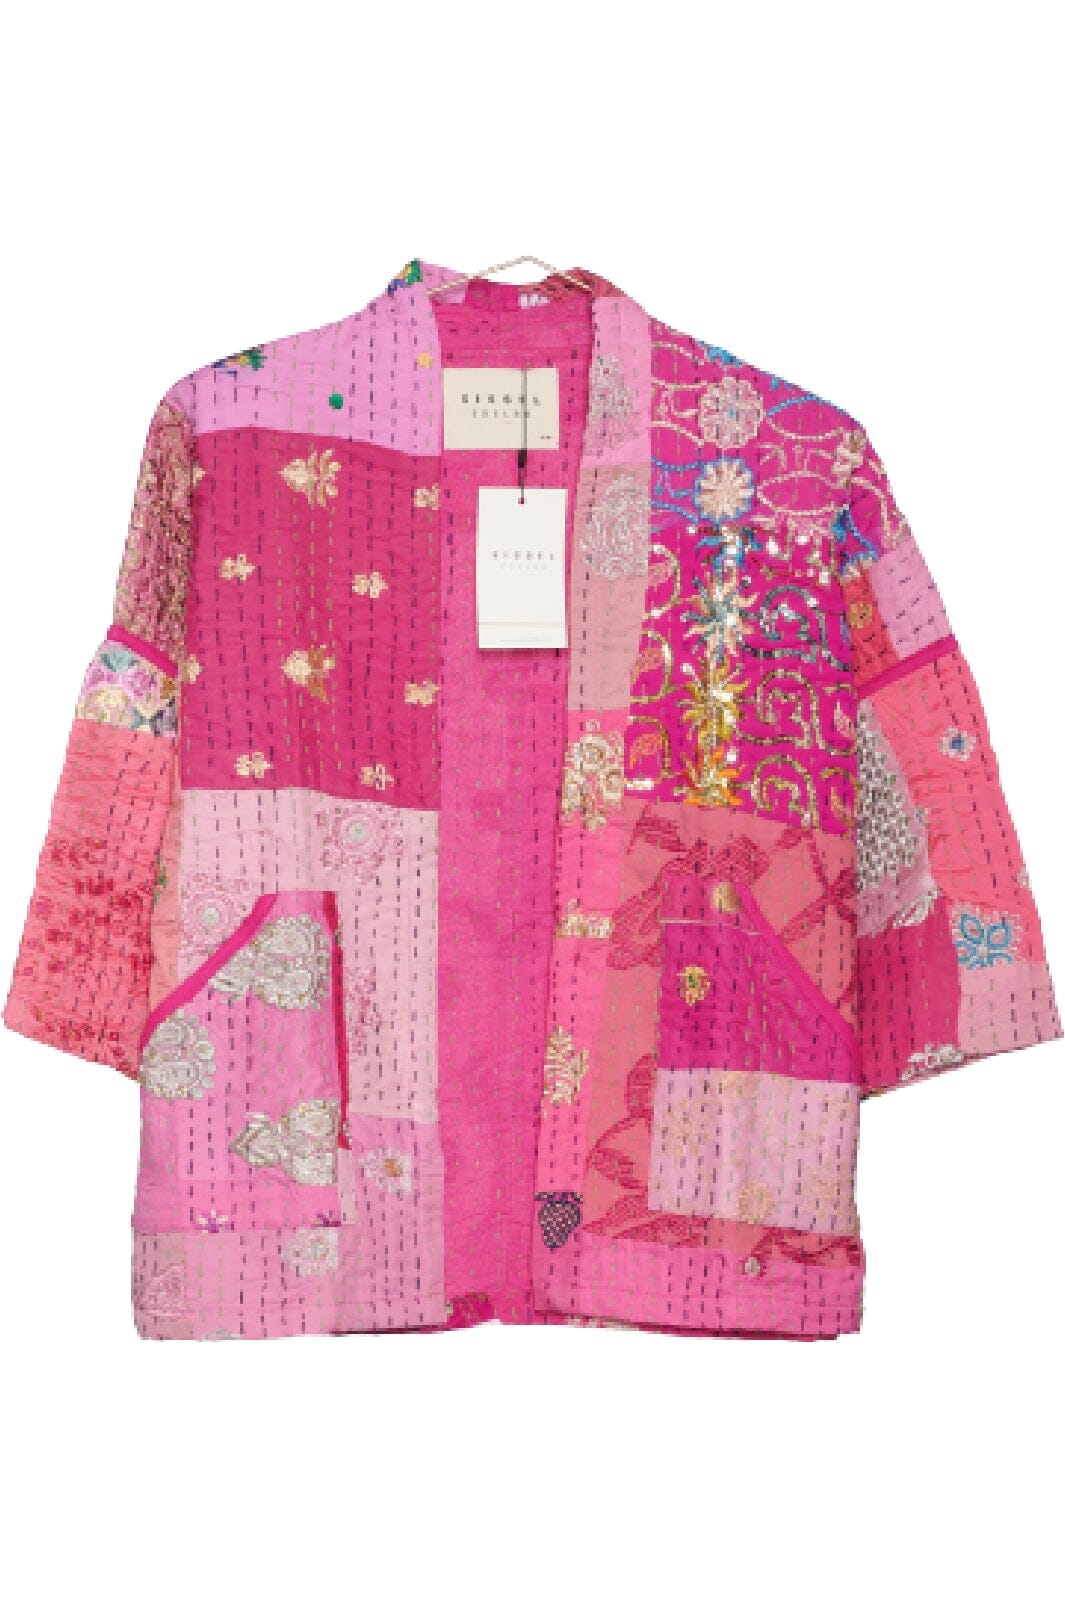 Sissel Edelbo - Tallulah Embroidery Patchwork Jacket,Tallulah Embroidery Patchwork Jacket - No. 183 Jakker 